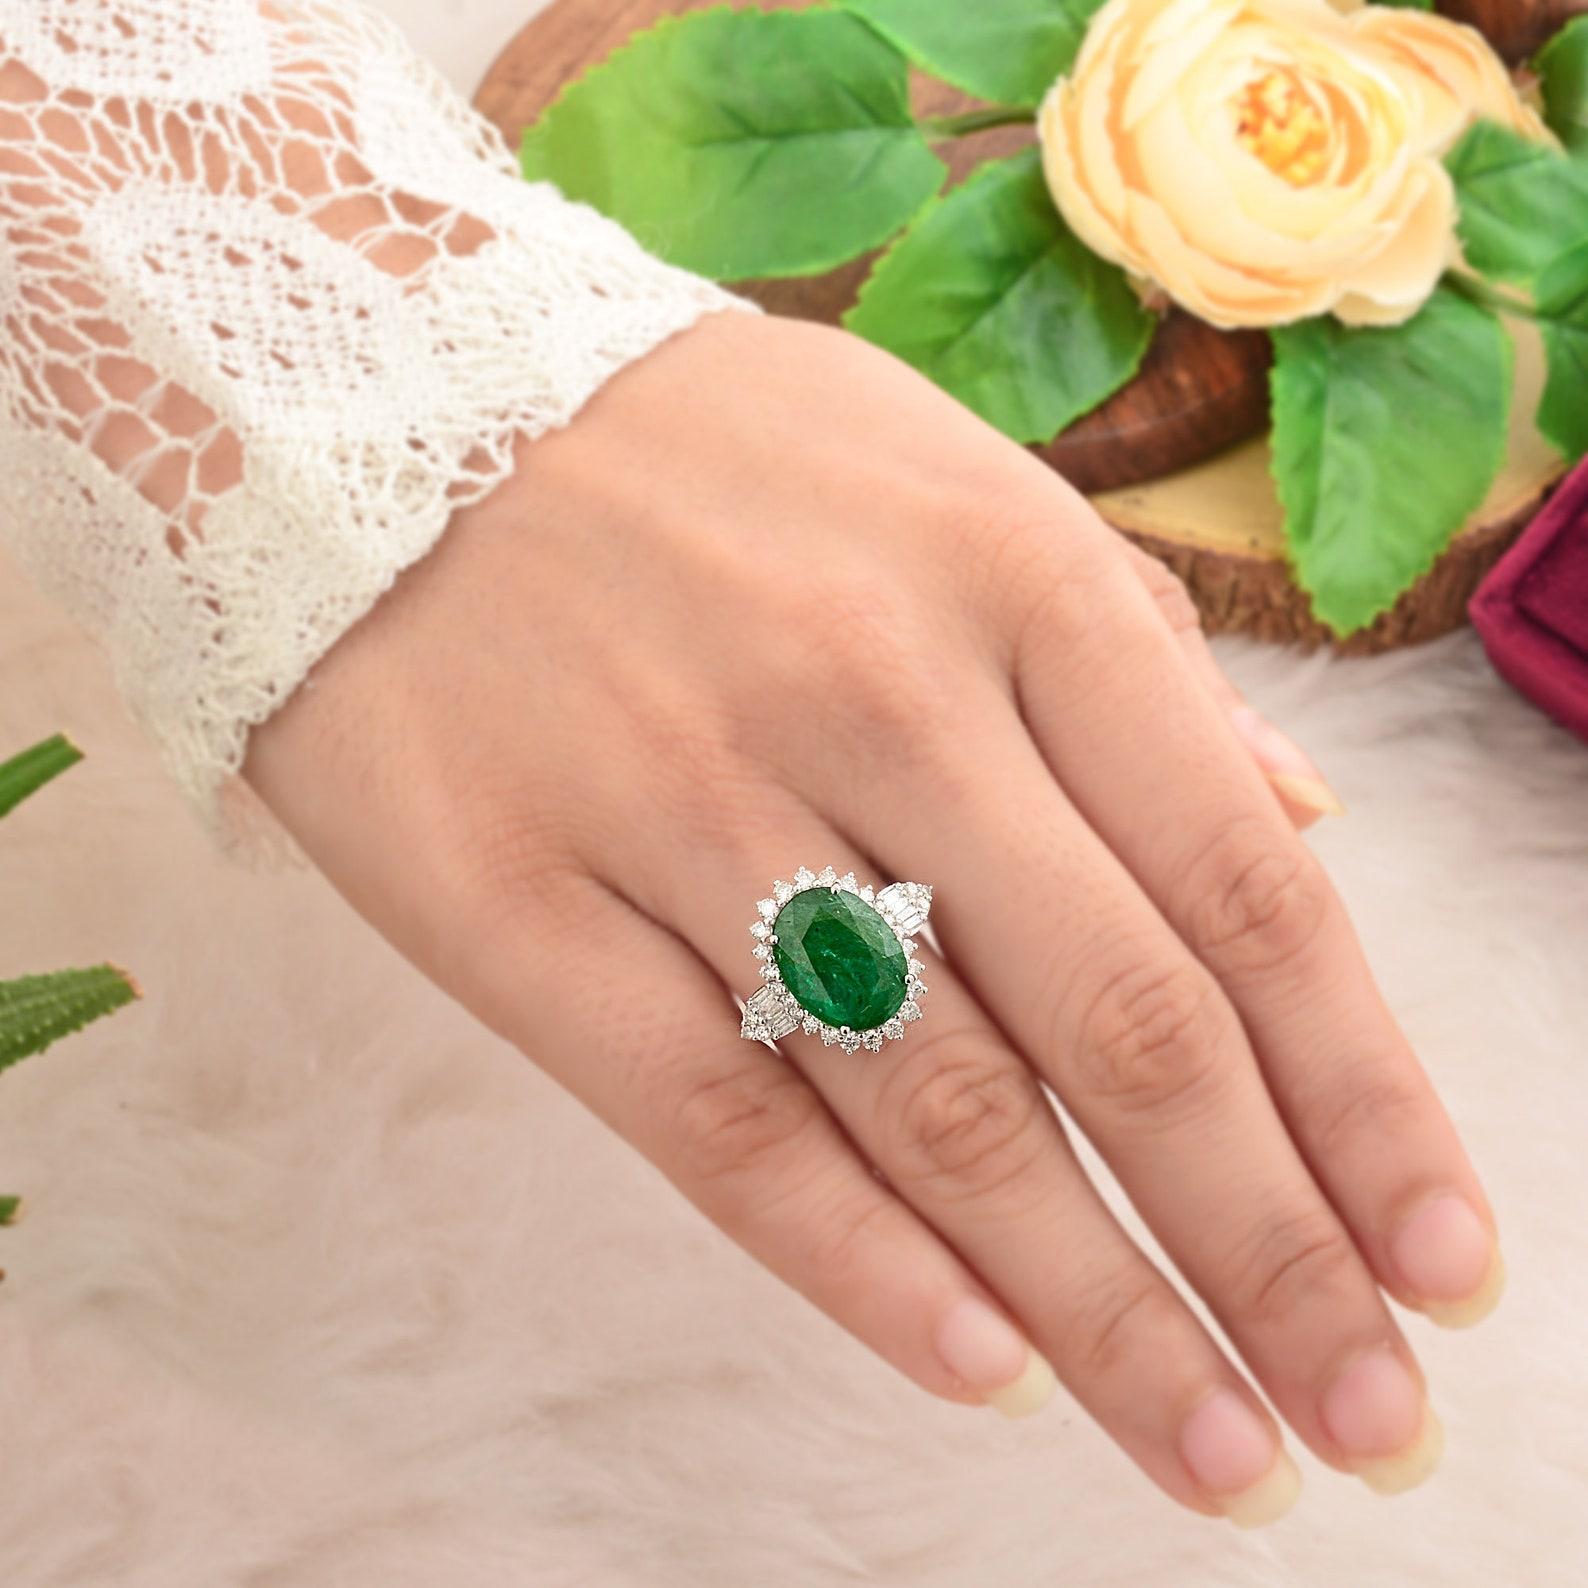 This ring has been meticulously crafted from 10-karat gold.  It is hand set with 5.6 carats emerald & .70 carats of sparkling diamonds. 

The ring is a size 7 and may be resized to larger or smaller upon request. 
FOLLOW  MEGHNA JEWELS storefront to